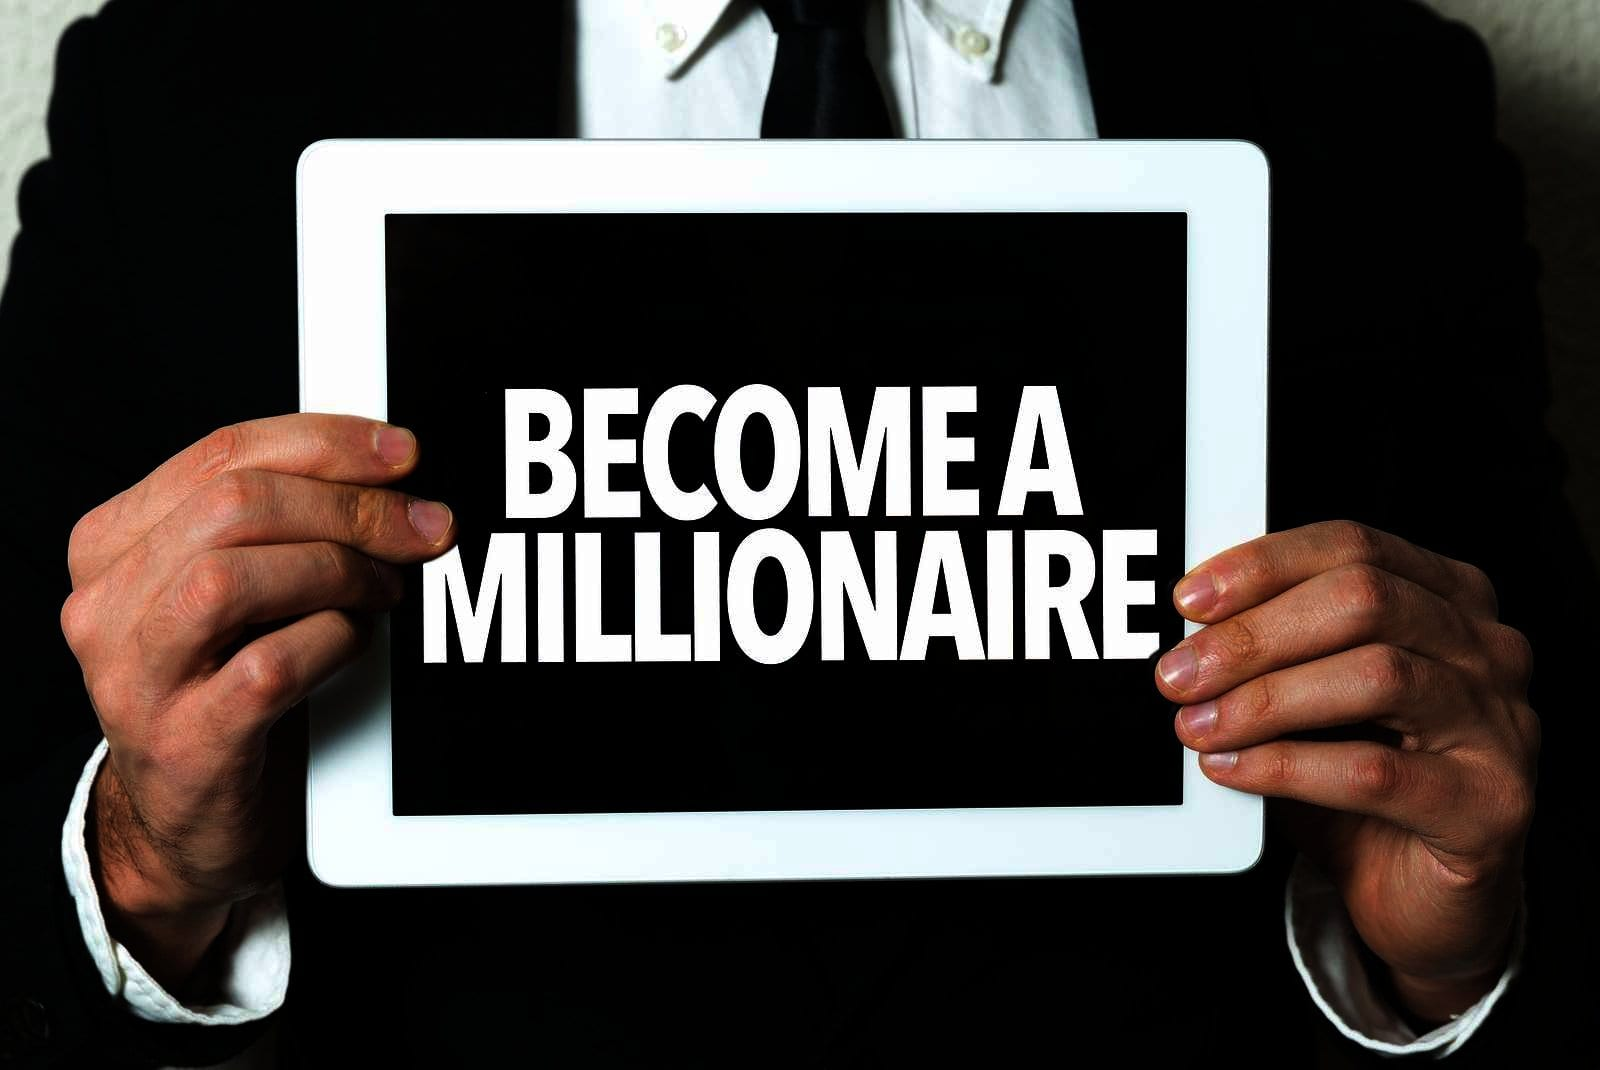 Become a Millionaire!